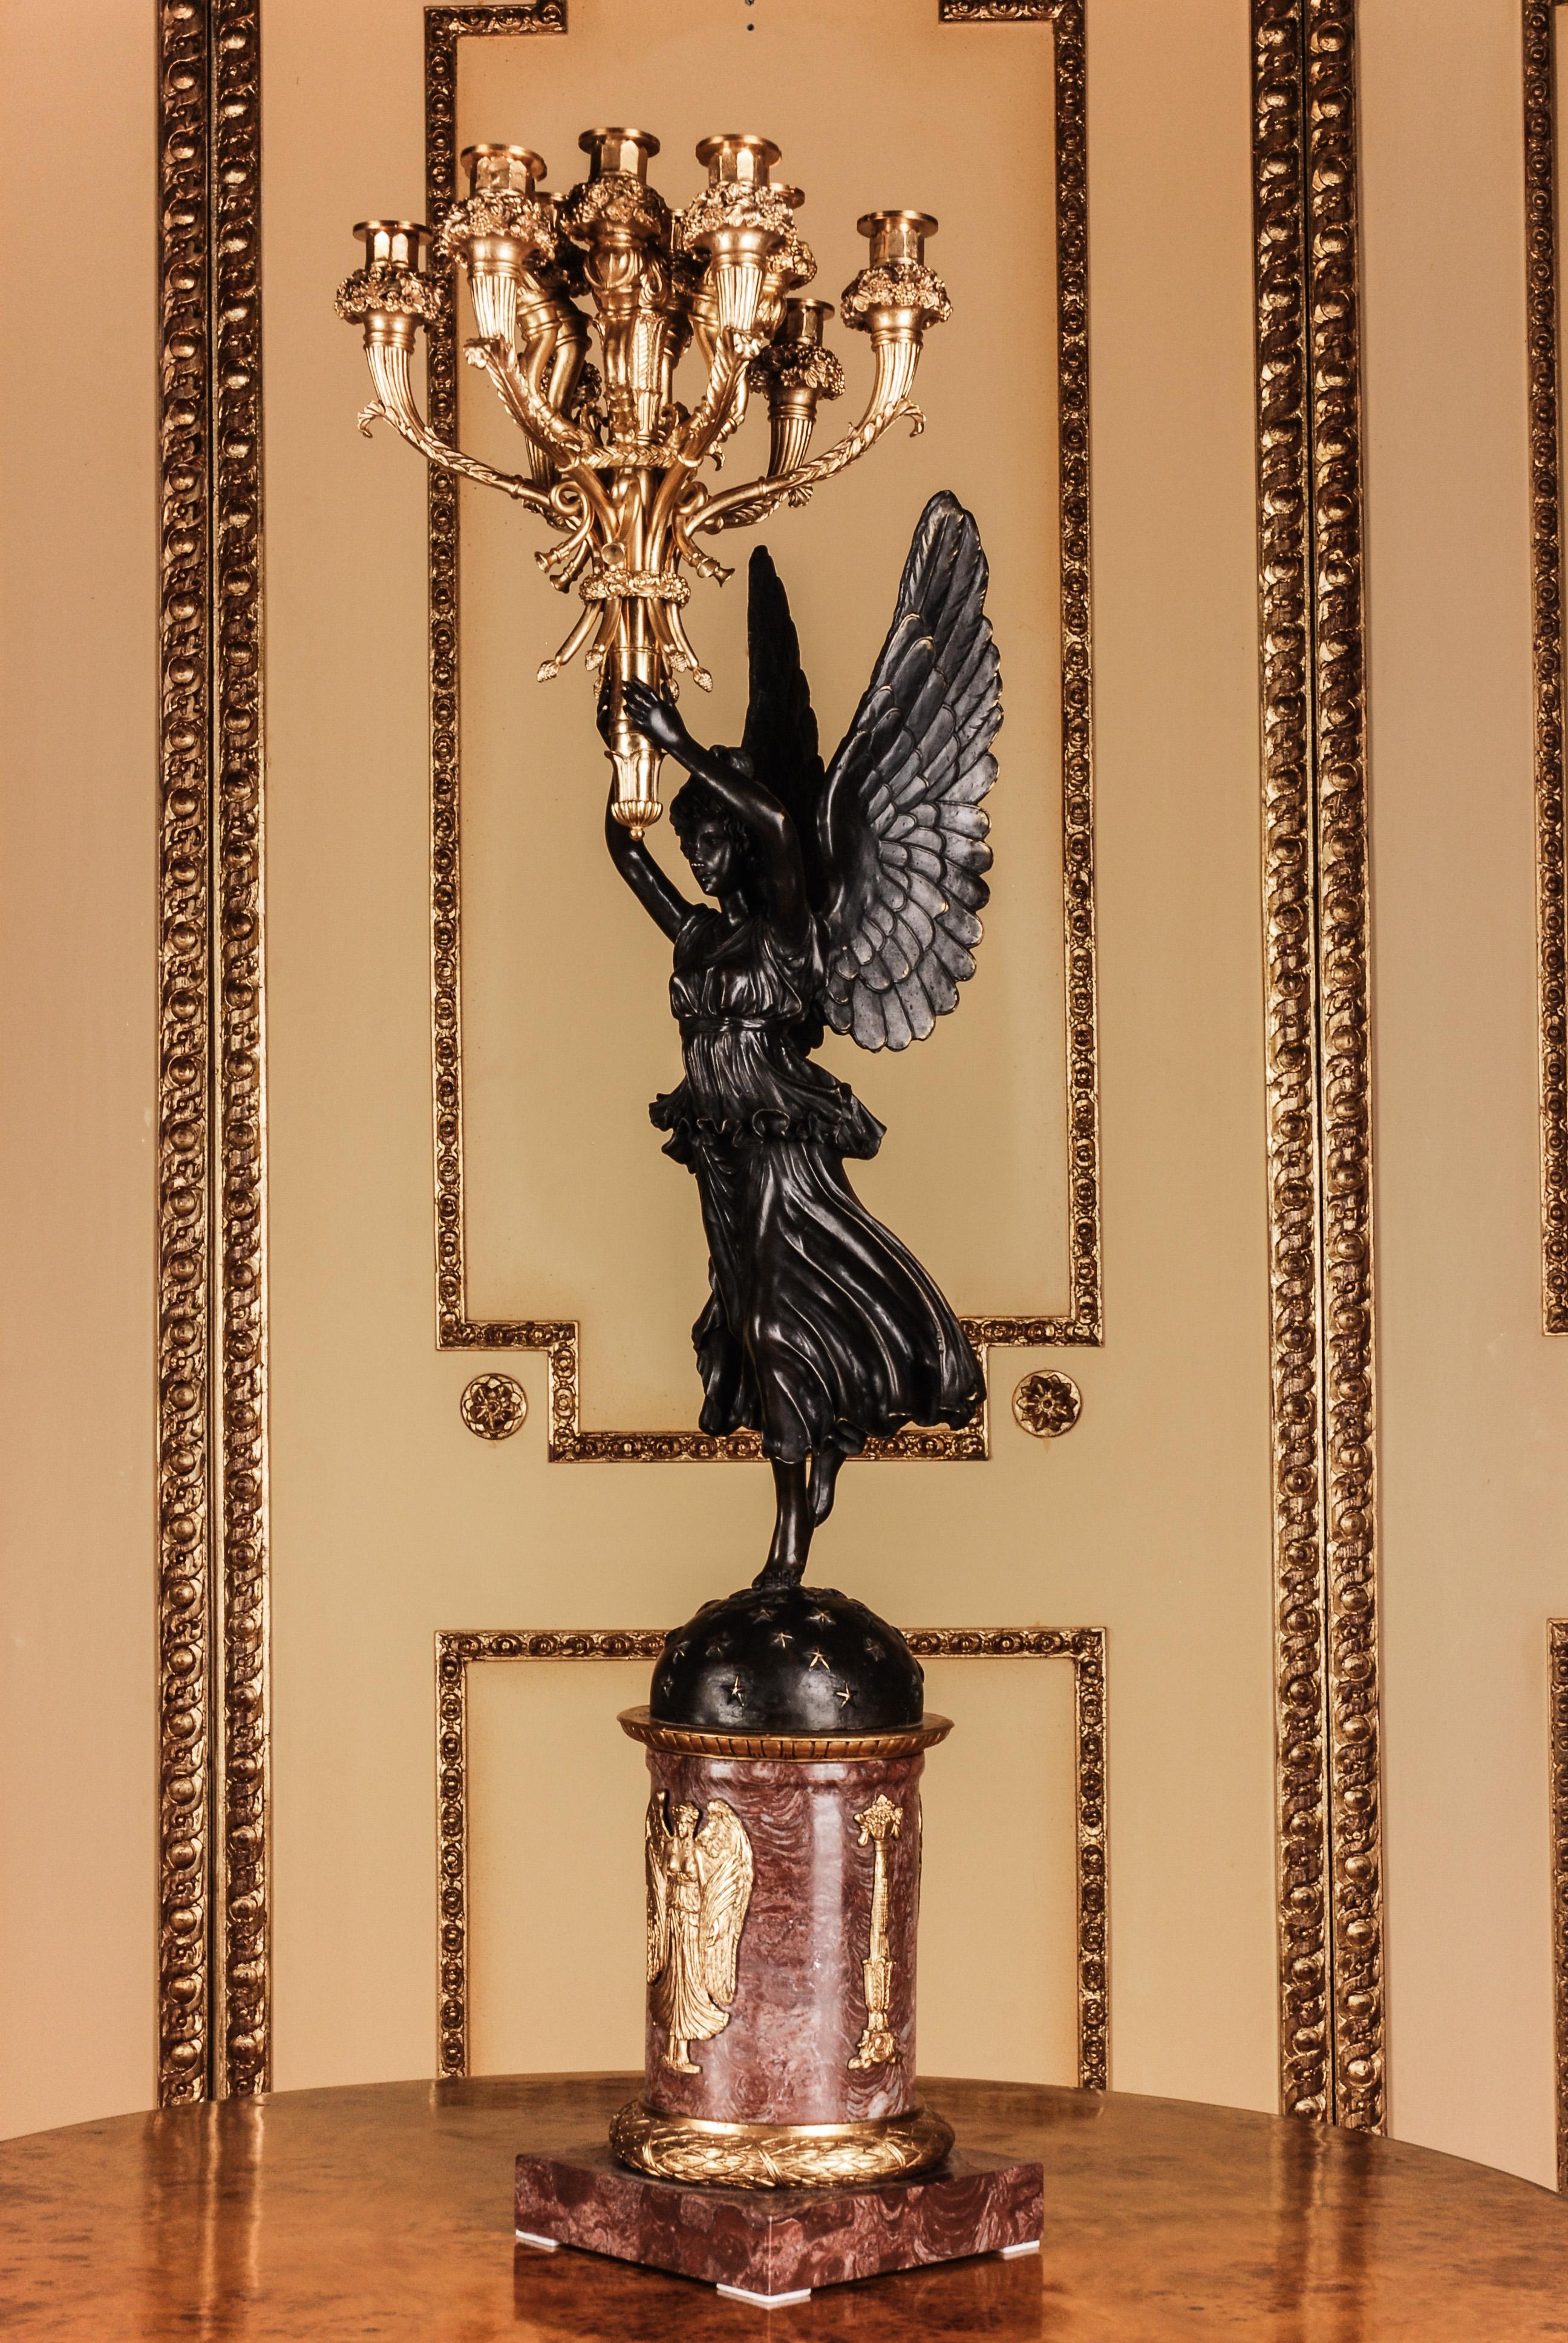 Exceptionally fine engraved and moulded bronze. Fully moulded
Designed figurines (Victoria). Overhead and hand held torch formed
shaft with 12 fully Horn-style sweeping light arms. This model belongs
to the exceptionally proportioned candelabras,